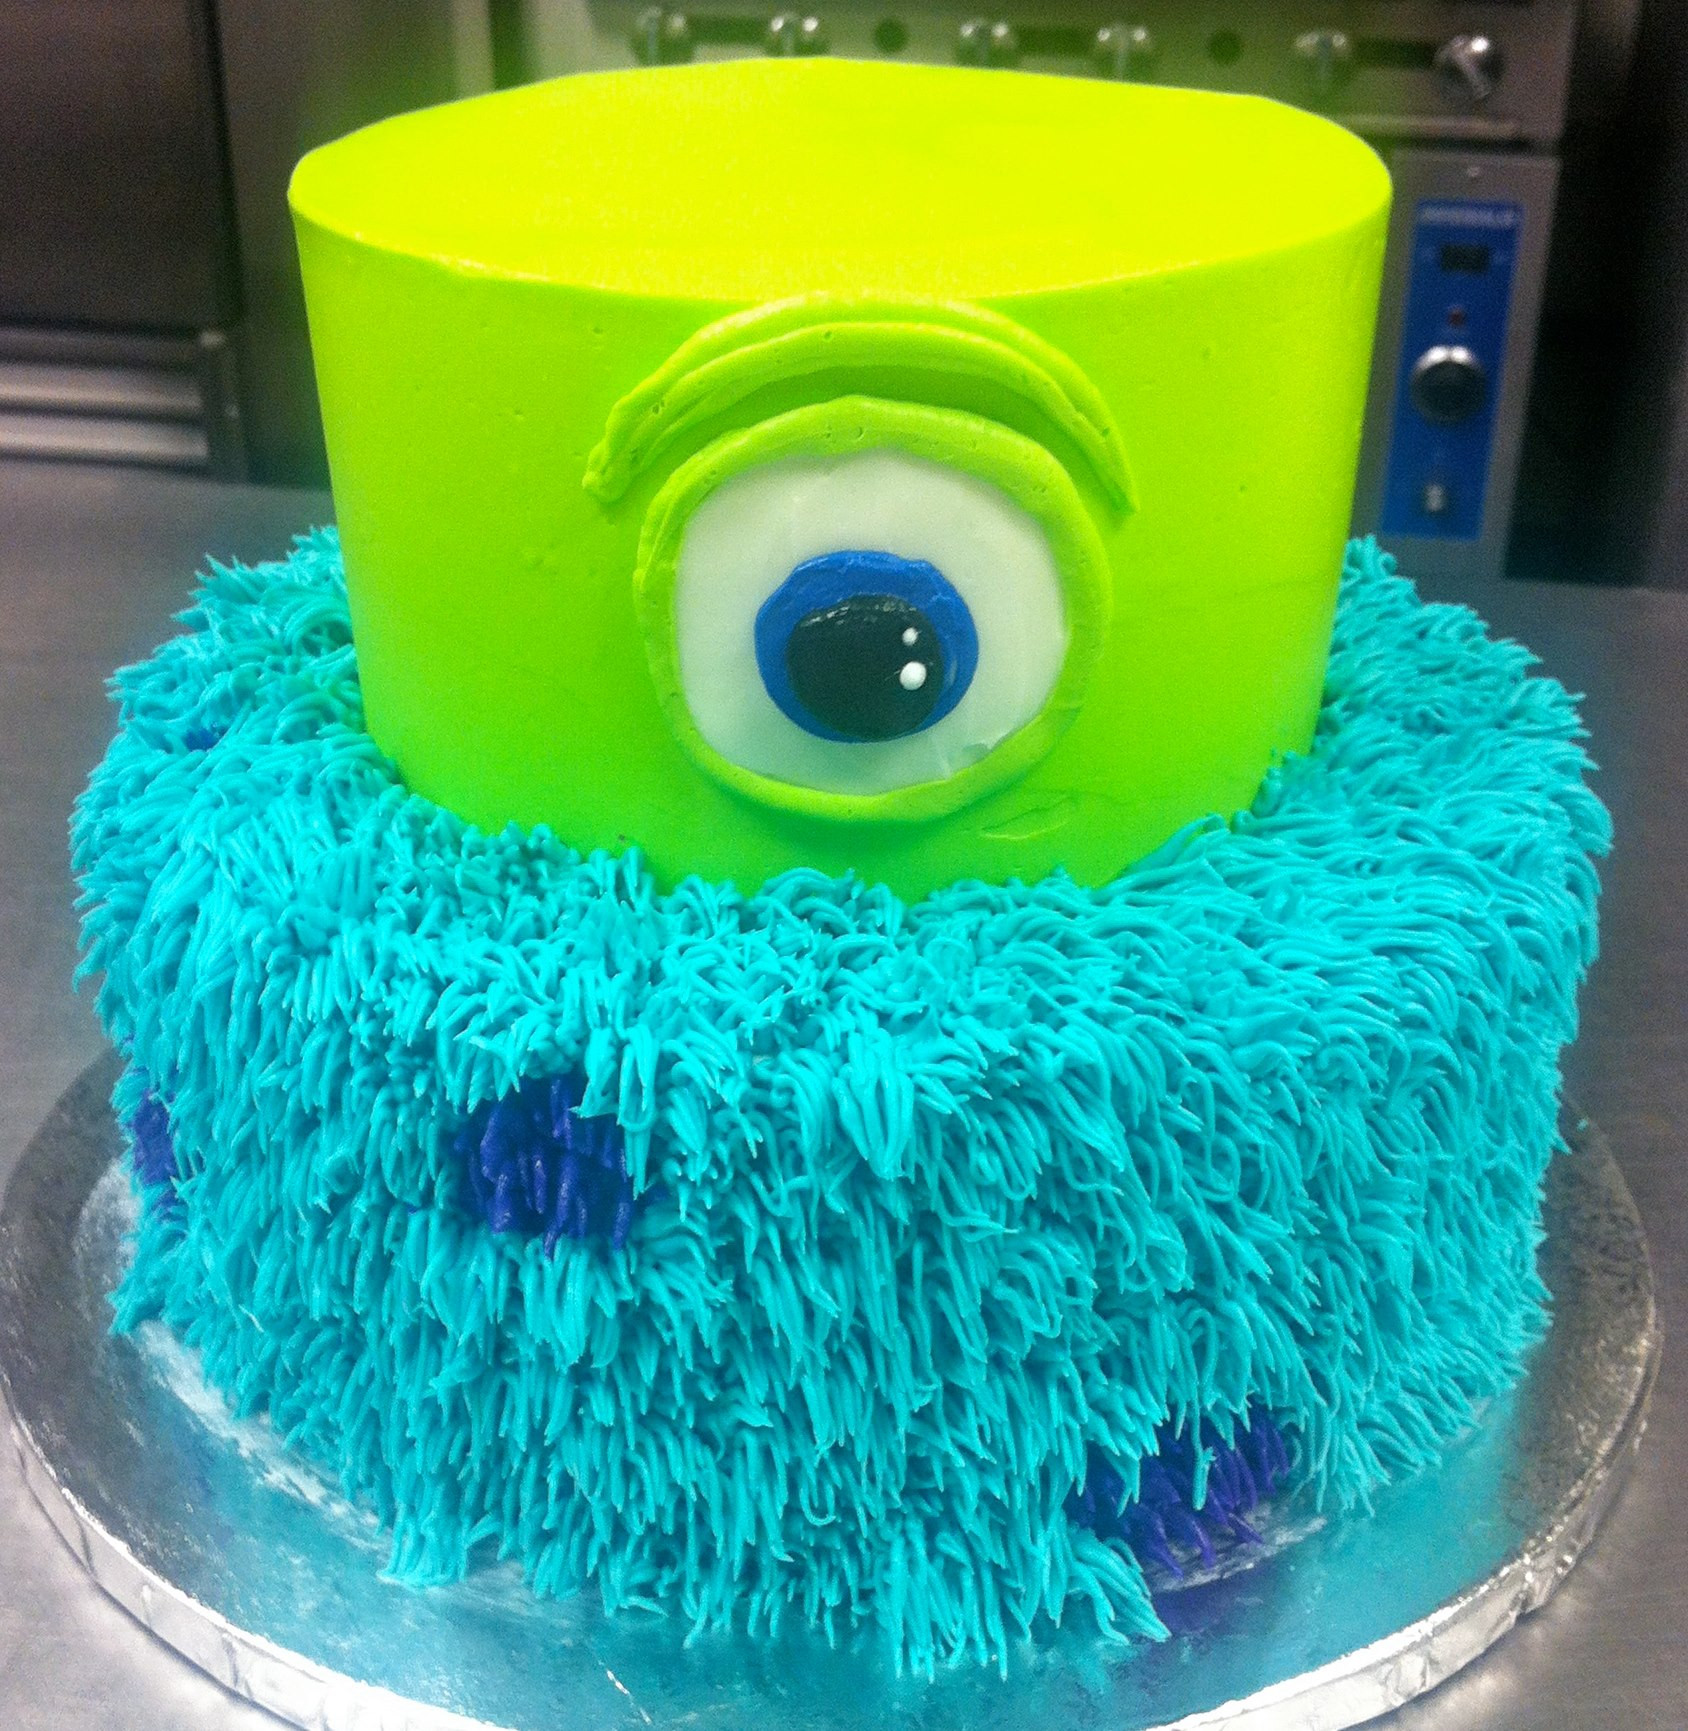 Monsters Inc Birthday Cake
 Monsters Inc Cake Hayley Cakes and CookiesHayley Cakes